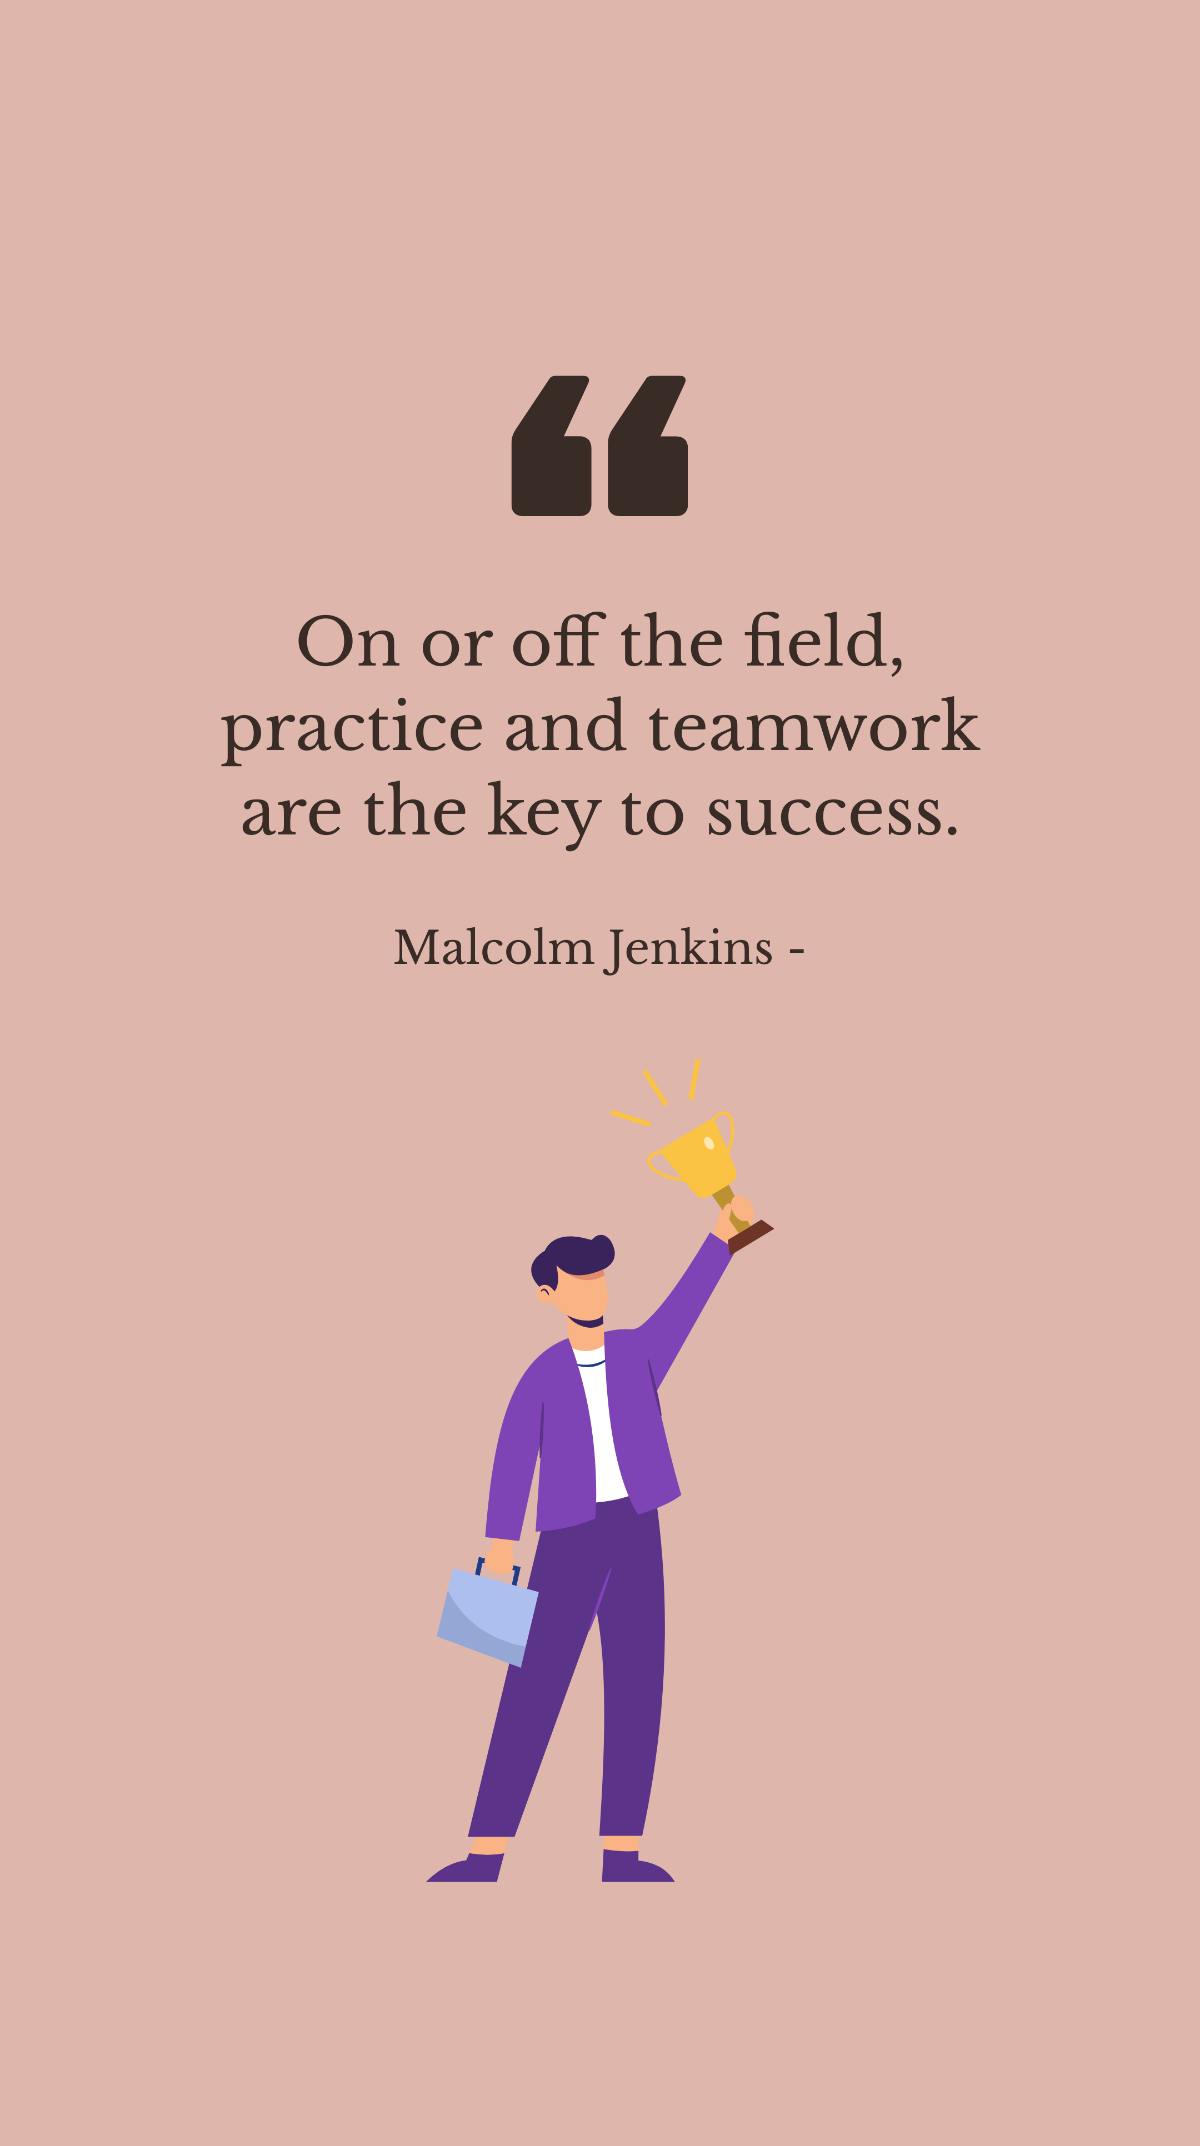 Malcolm Jenkins - On or off the field, practice and teamwork are the key to success.